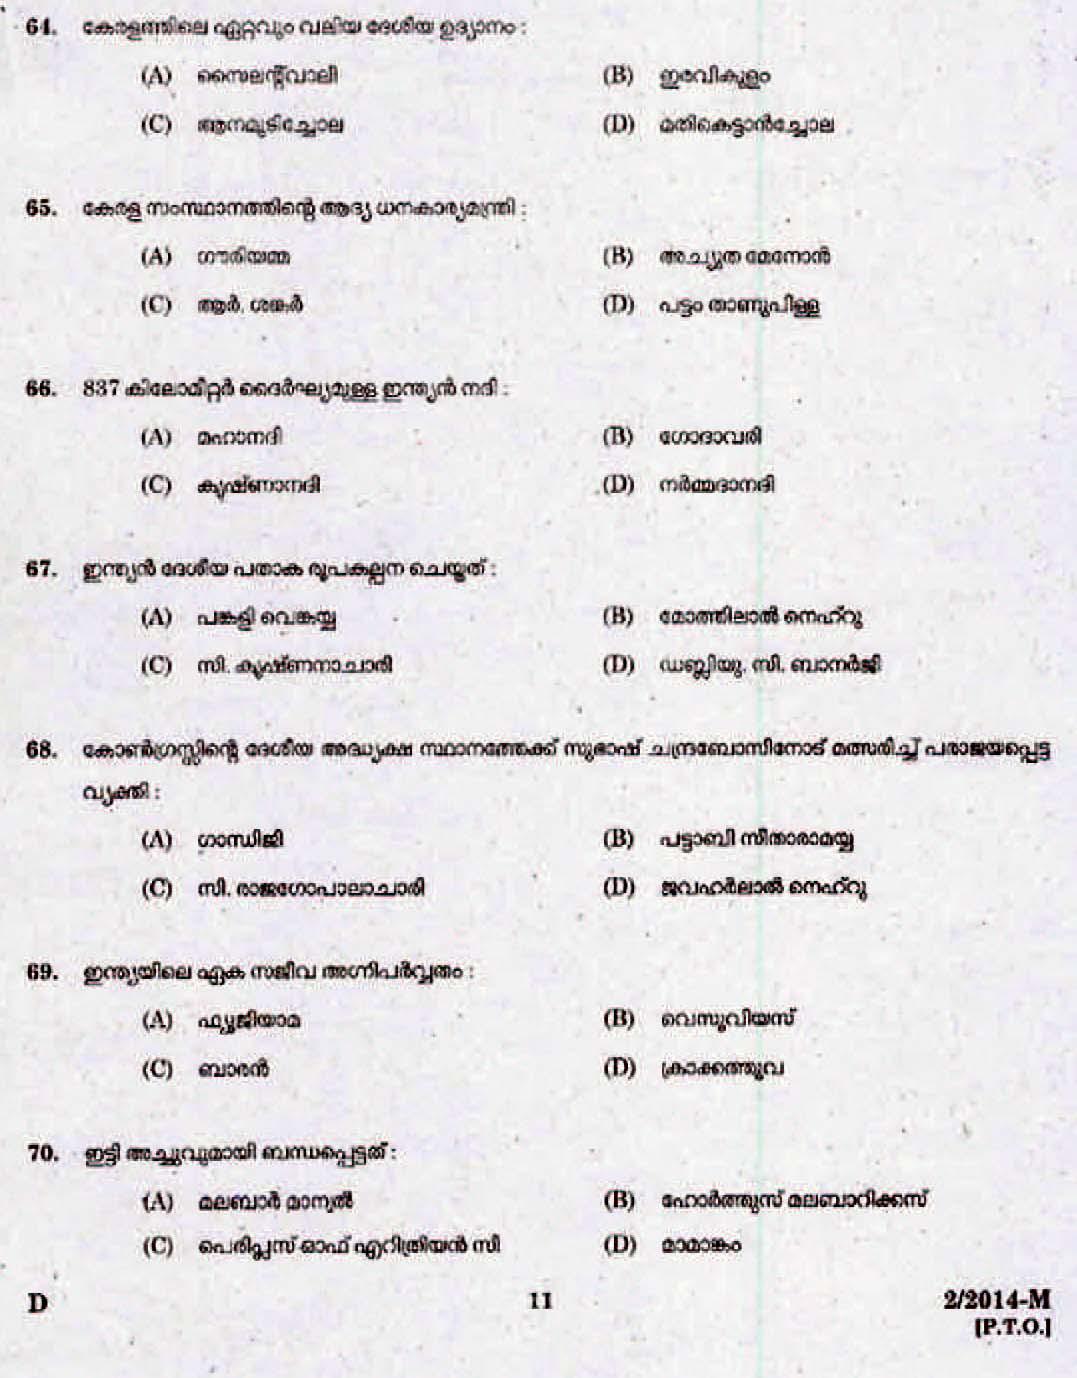 LD Clerk Question Paper Malayalam 2014 Paper Code 022014 M 8